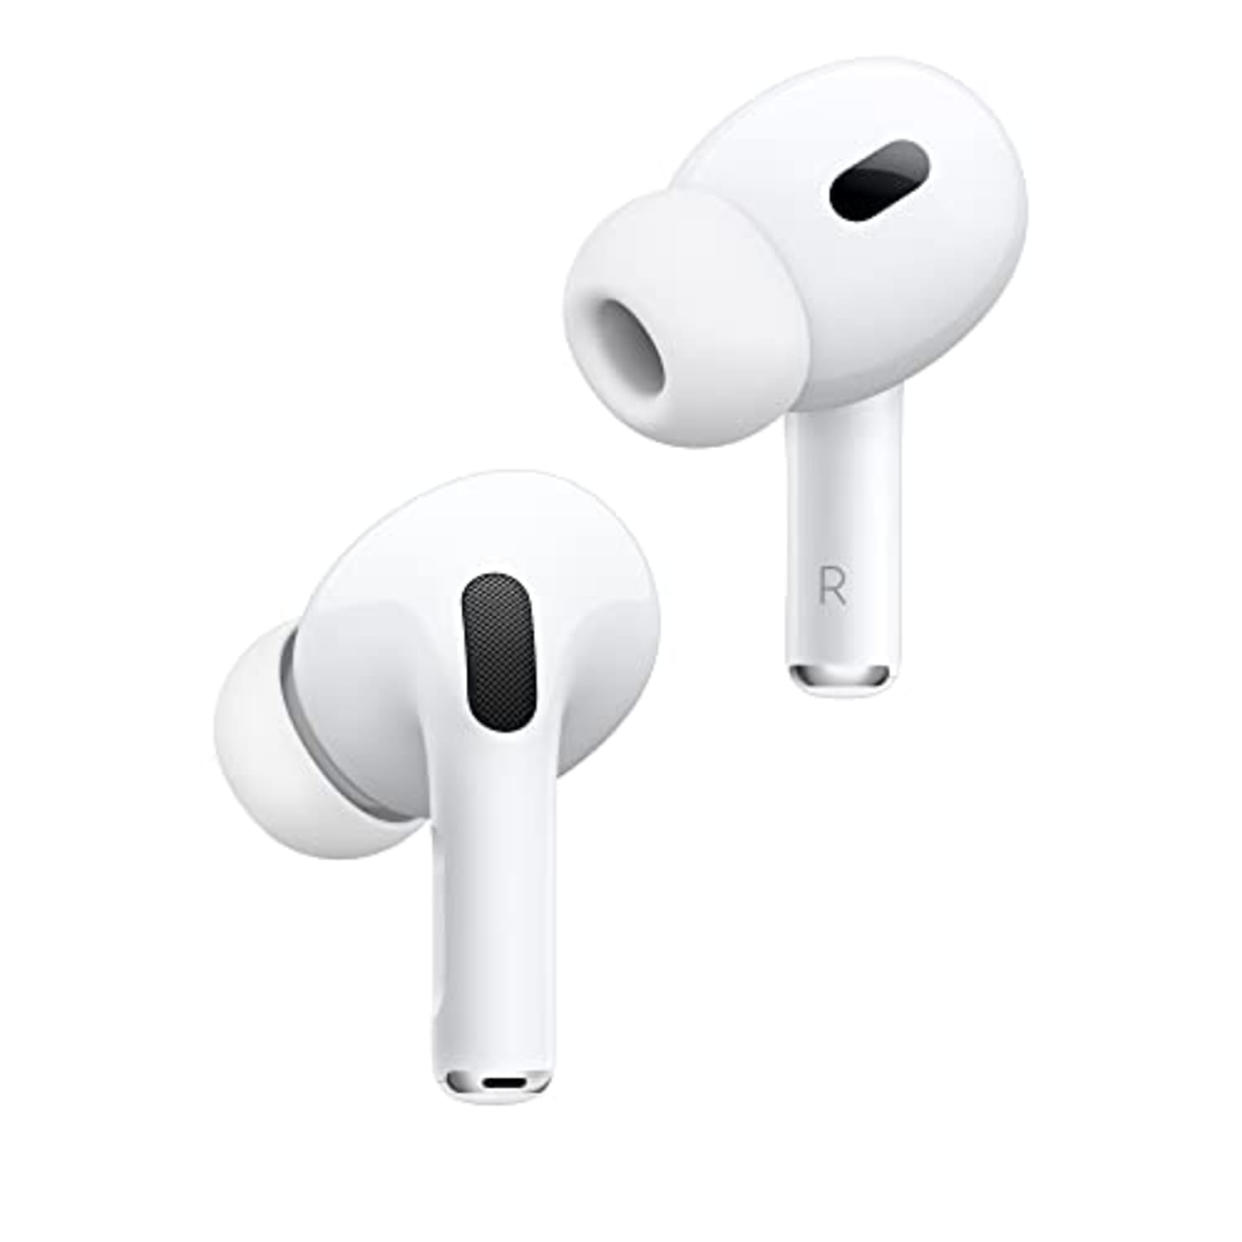 Apple AirPods Pro (2nd Gen) Wireless Earbuds, Up to 2X More Active Noise Cancelling, Adaptive Transparency, Personalized Spatial Audio MagSafe Charging Case (USB-C) Bluetooth Headphones for iPhone (AMAZON)